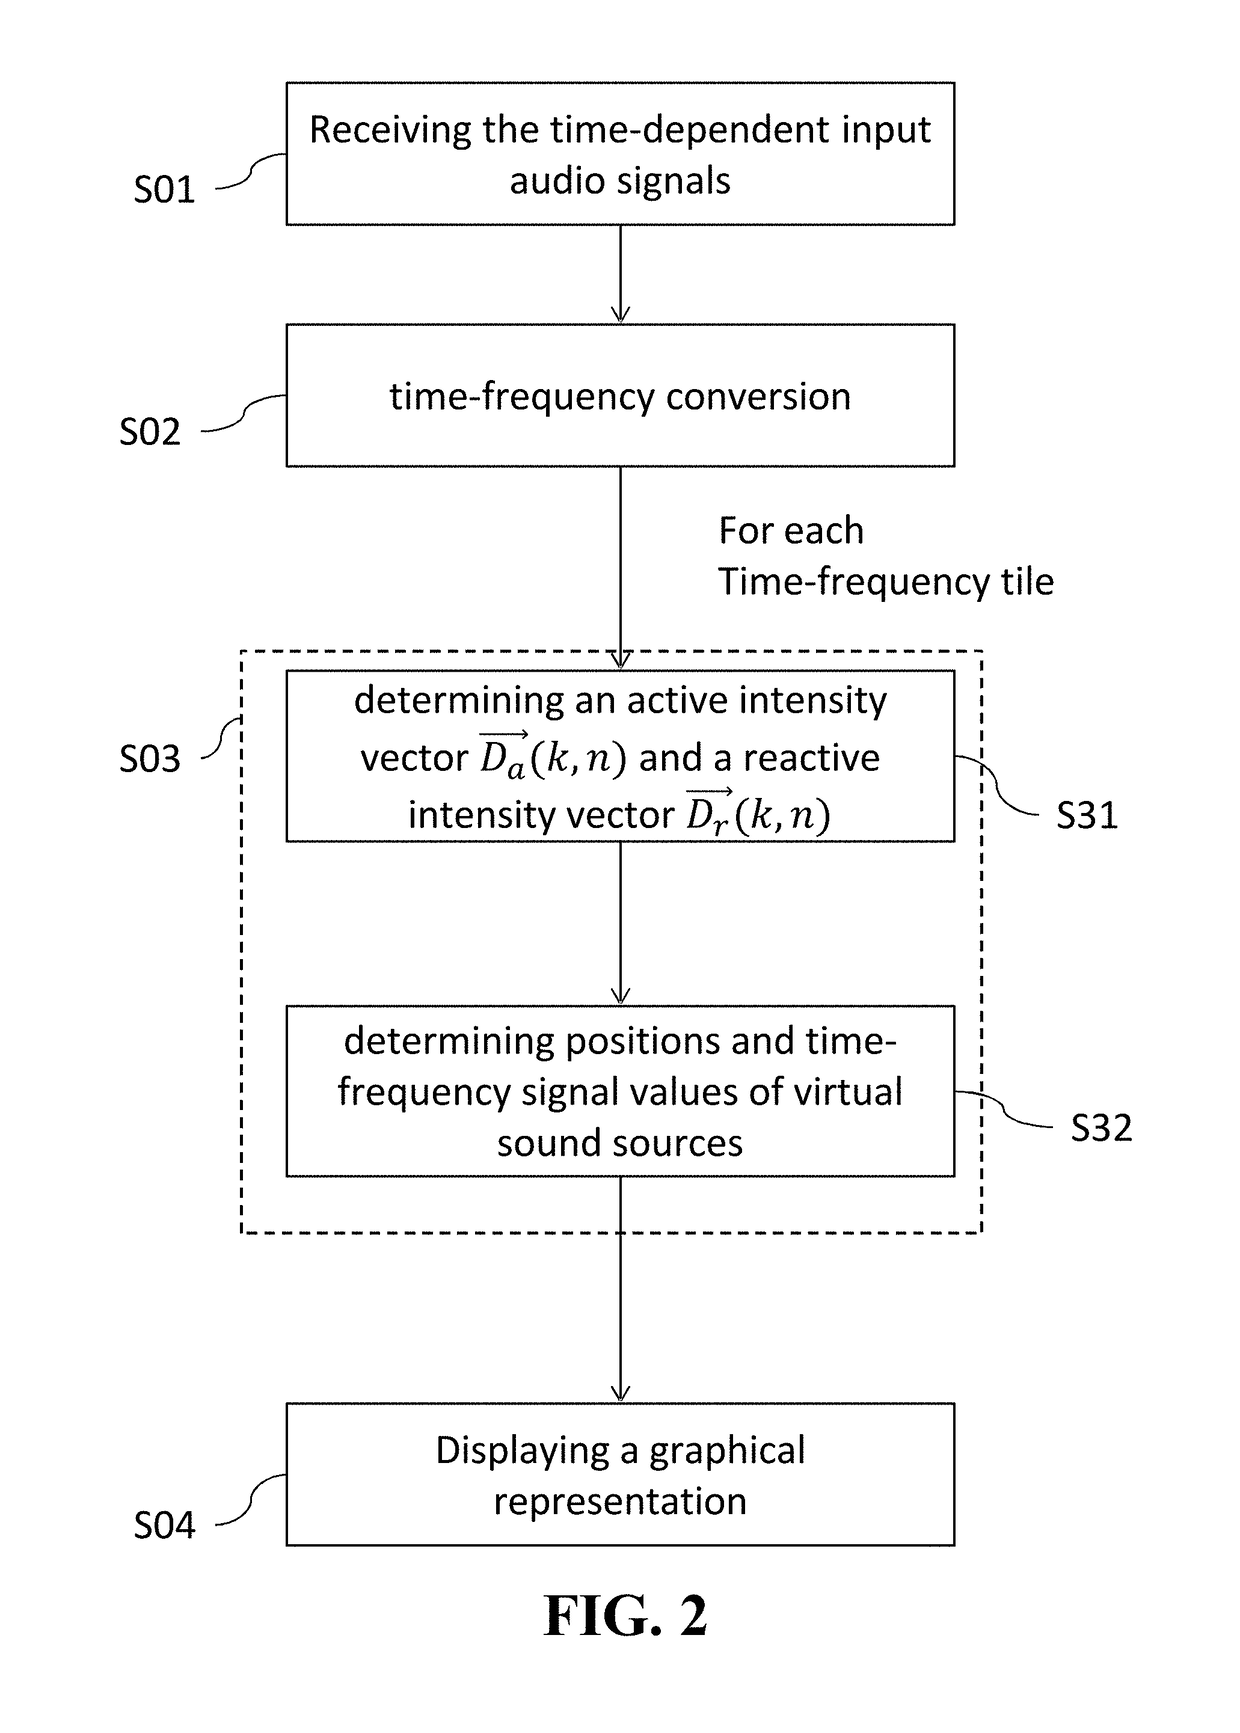 Method for Visualizing the Directional Sound Activity of a Multichannel Audio Signal